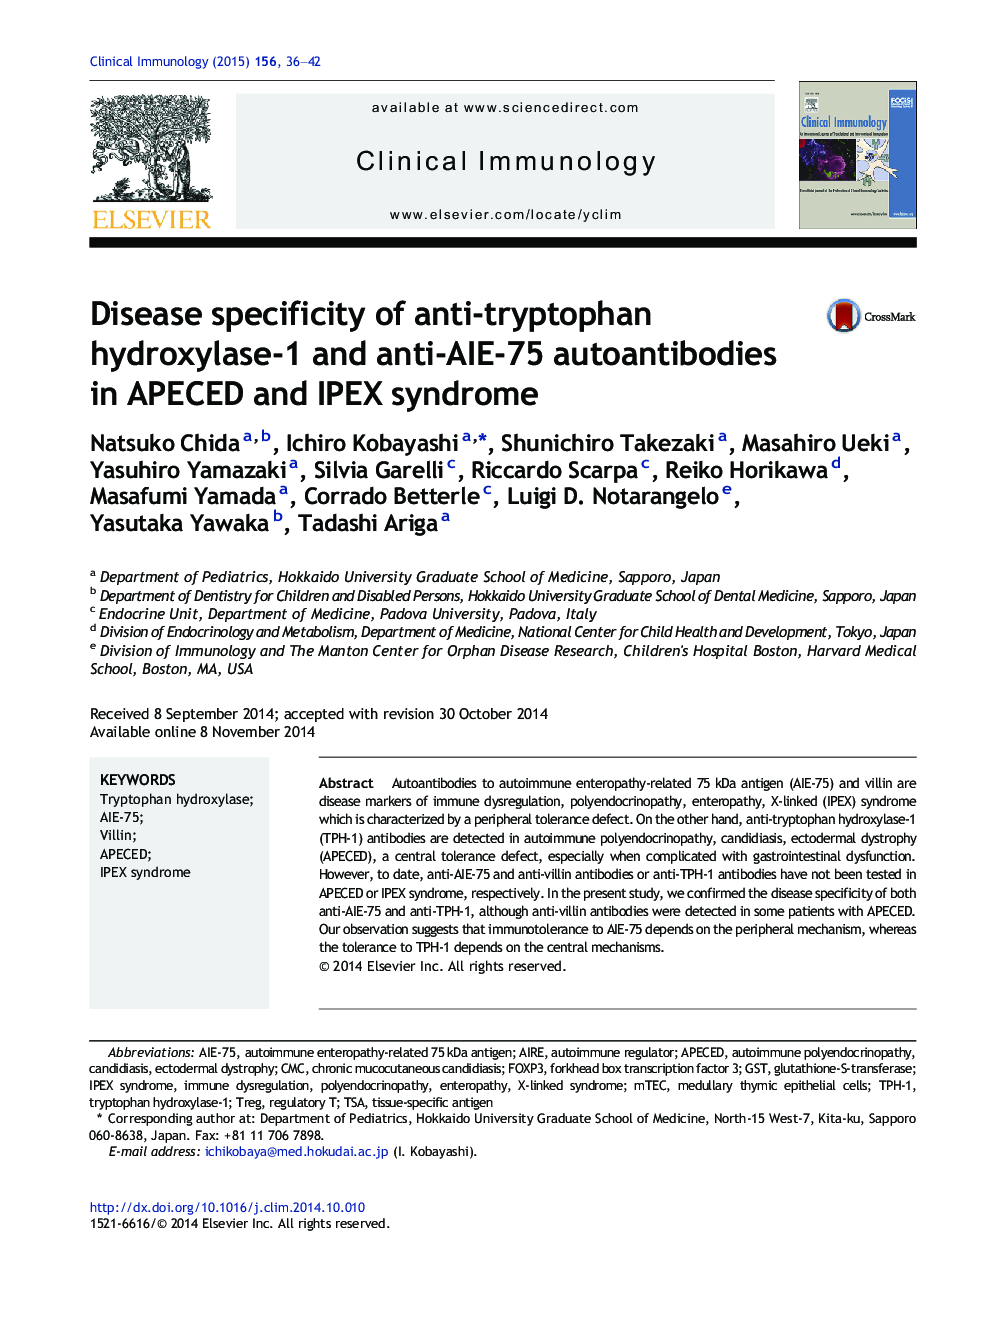 Disease specificity of anti-tryptophan hydroxylase-1 and anti-AIE-75 autoantibodies in APECED and IPEX syndrome